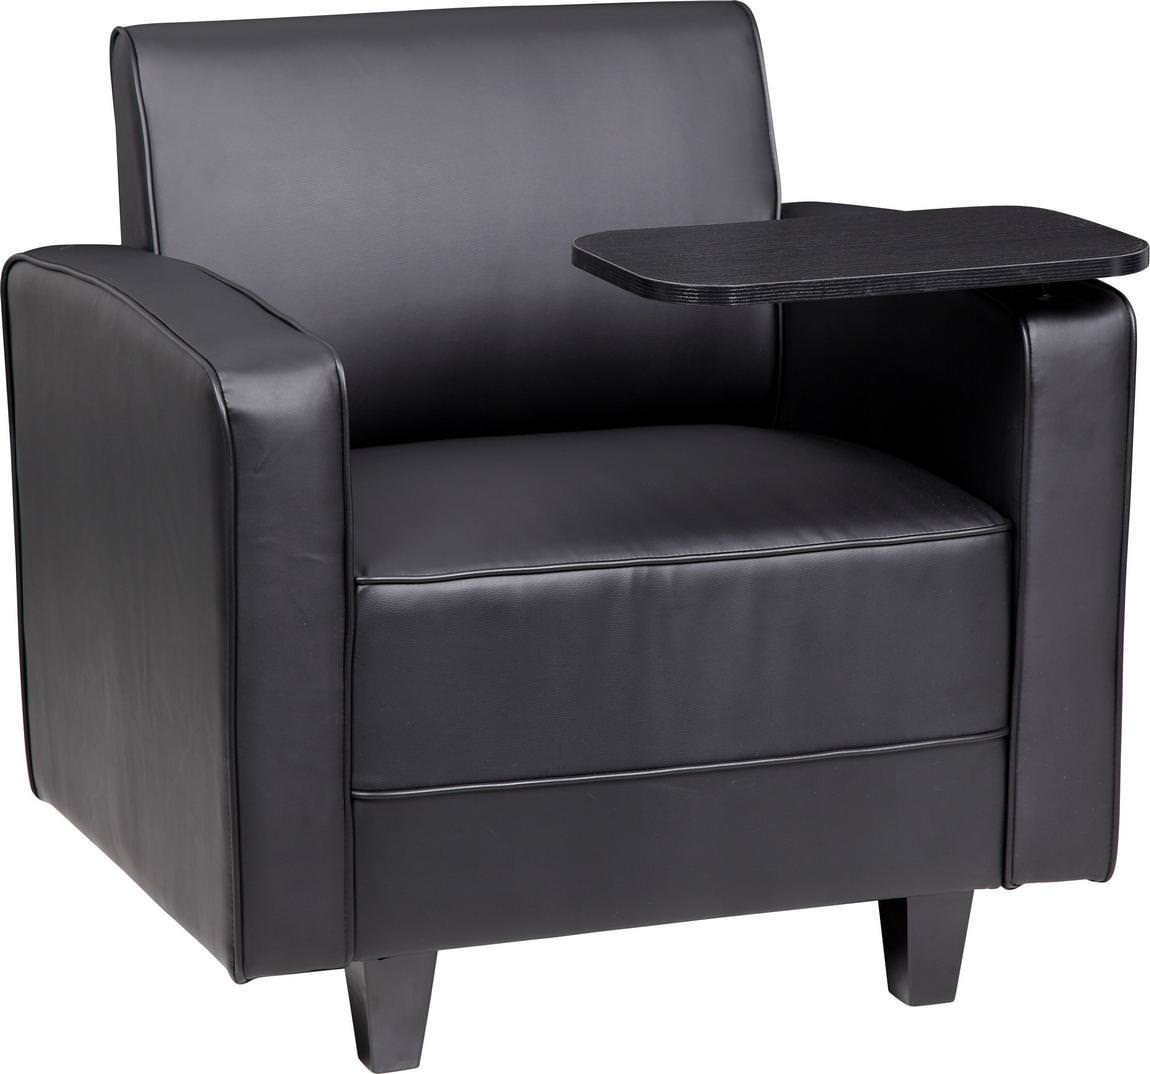 Black Reception Club Chair with Tablet Arm